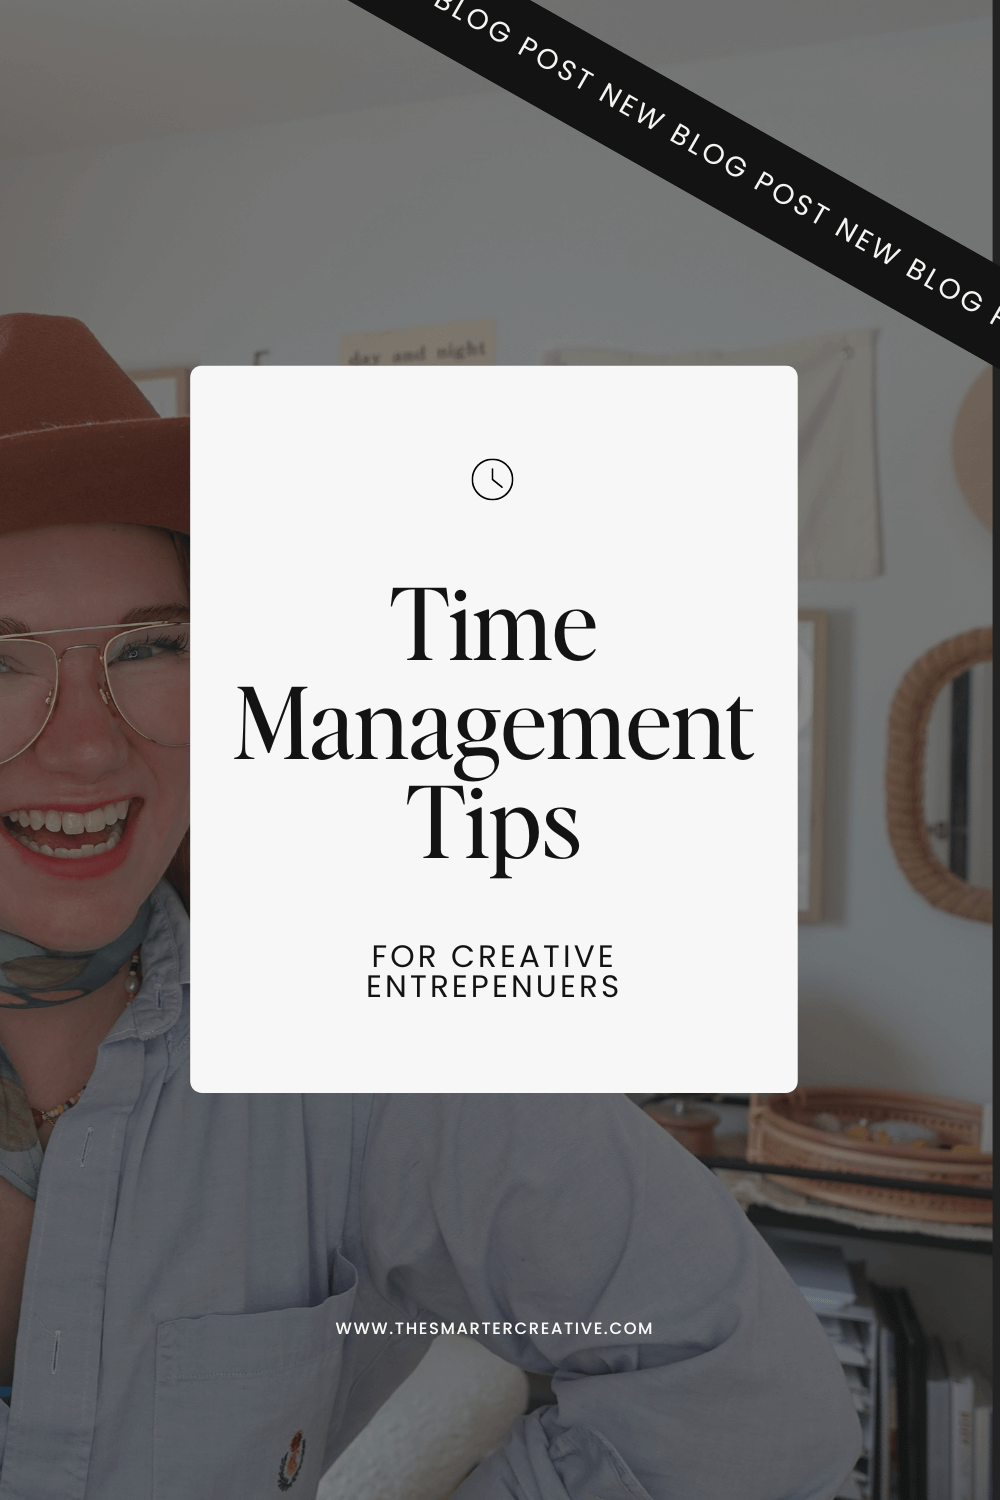 The image is a graphic promoting a blog post about time management tips for creative entrepreneurs. It features a gradient background of blue, pink, and orange, with the text "Time Management Tips For Creative Entrepreneurs" in white. The website URL "www.thesmartercreative.com" is also included at the bottom of the gr